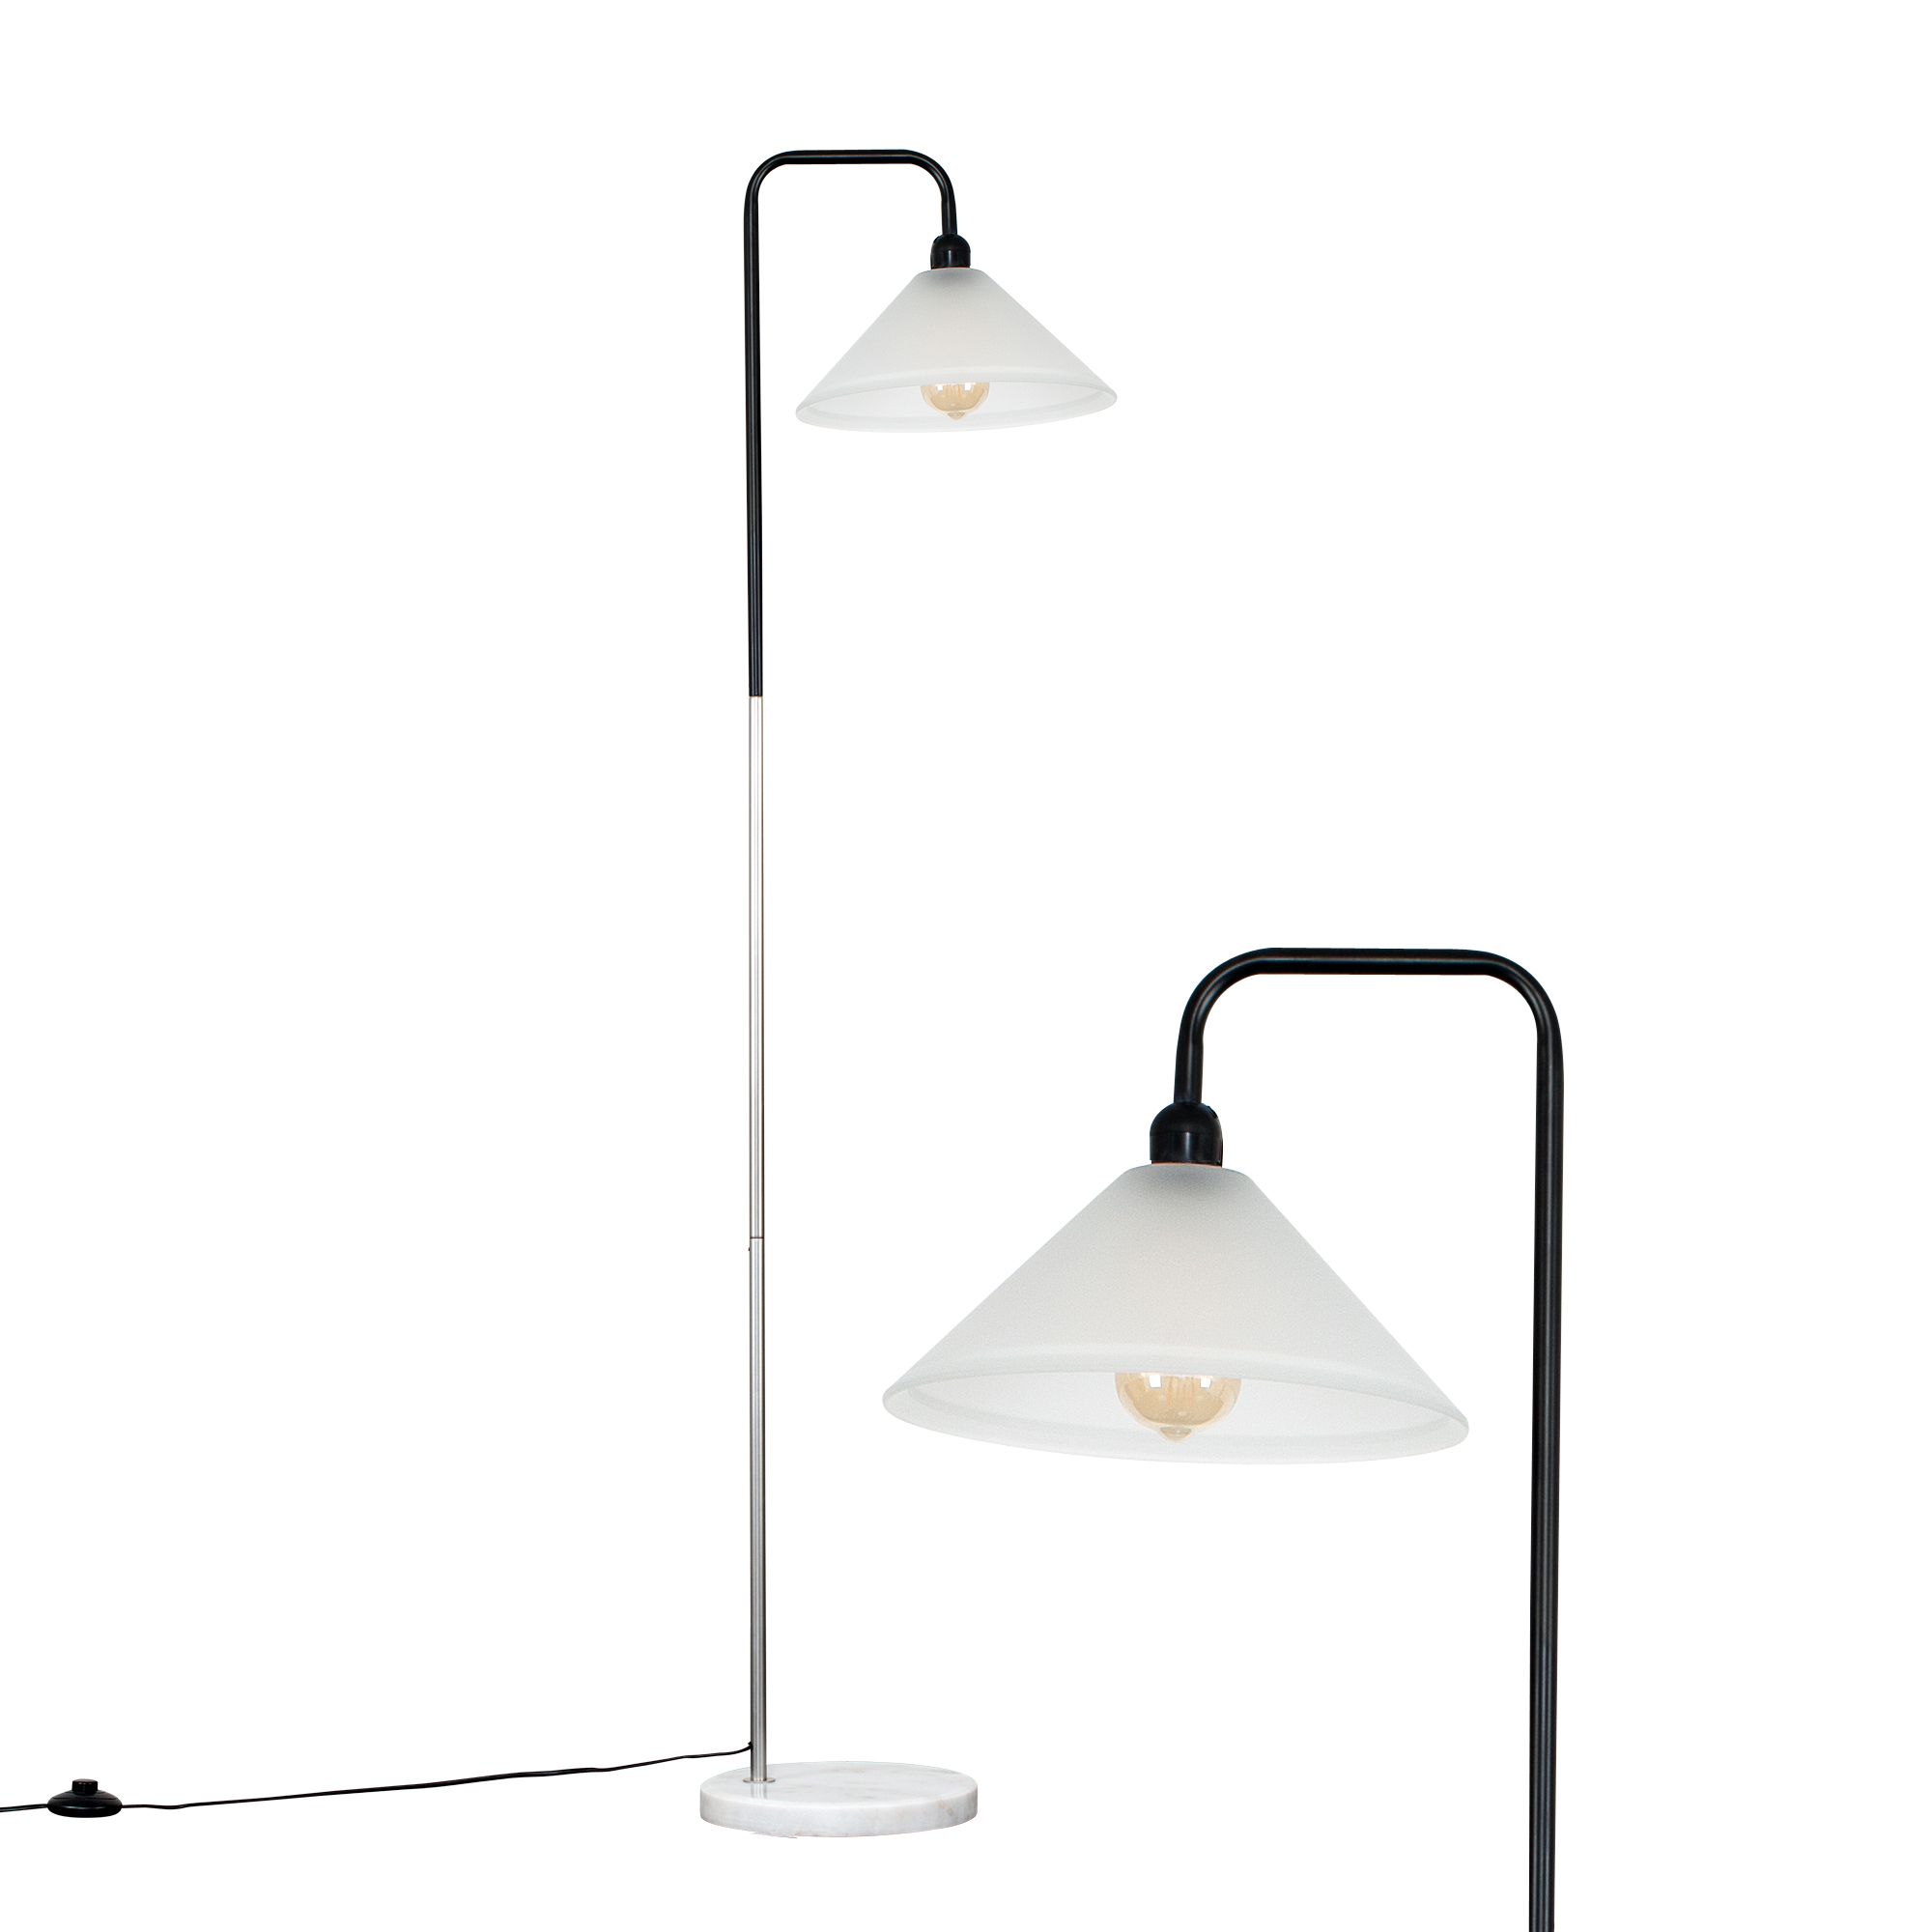 Talisman Black and Satin Nickel Lamp with Tapered Glass Shade